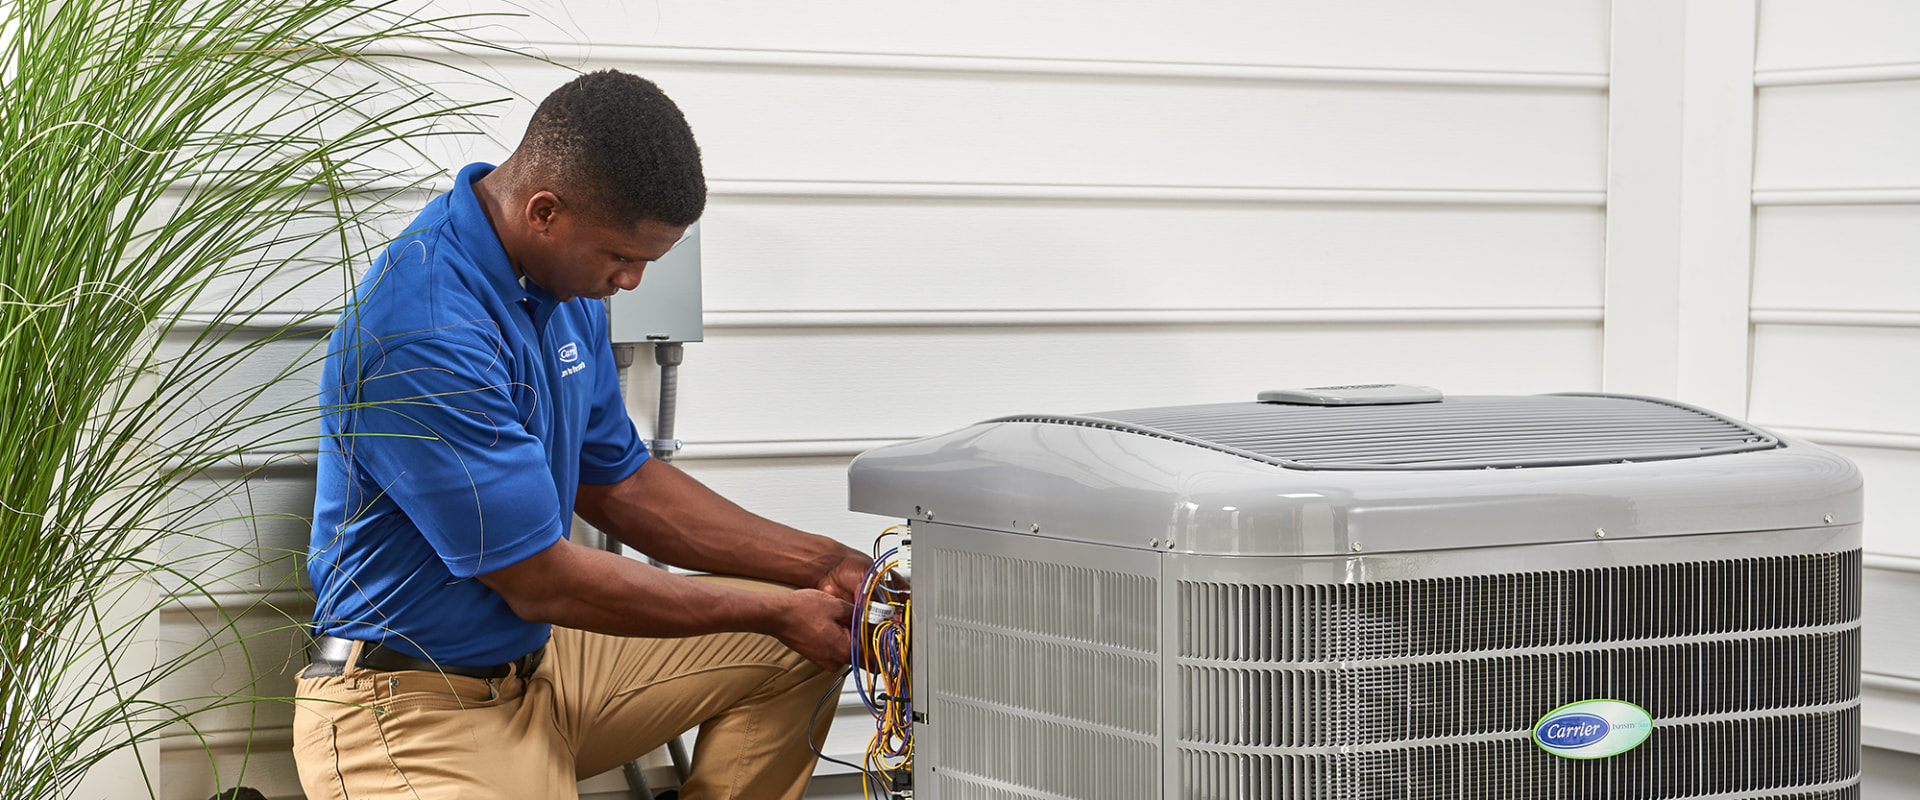 The Lifespan of an AC Unit: How Long Can It Really Last?